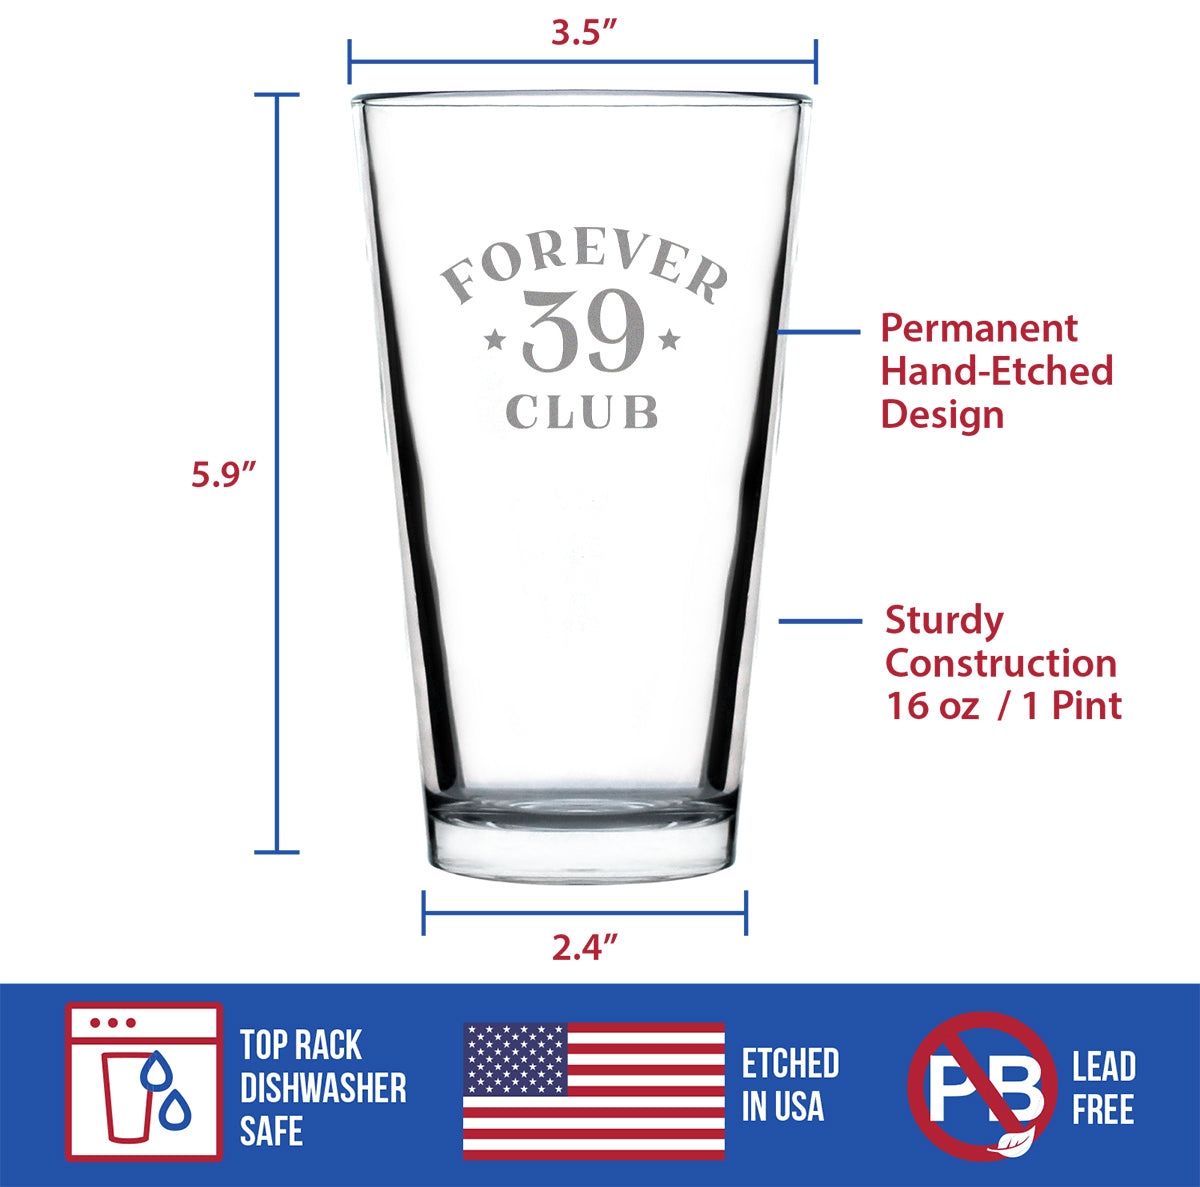 Forever 39 Club - Pint Glass for Beer 40th Birthday Gifts for Women &amp; Men Turning 40 - Fun Bday Party Decor - 16 Oz